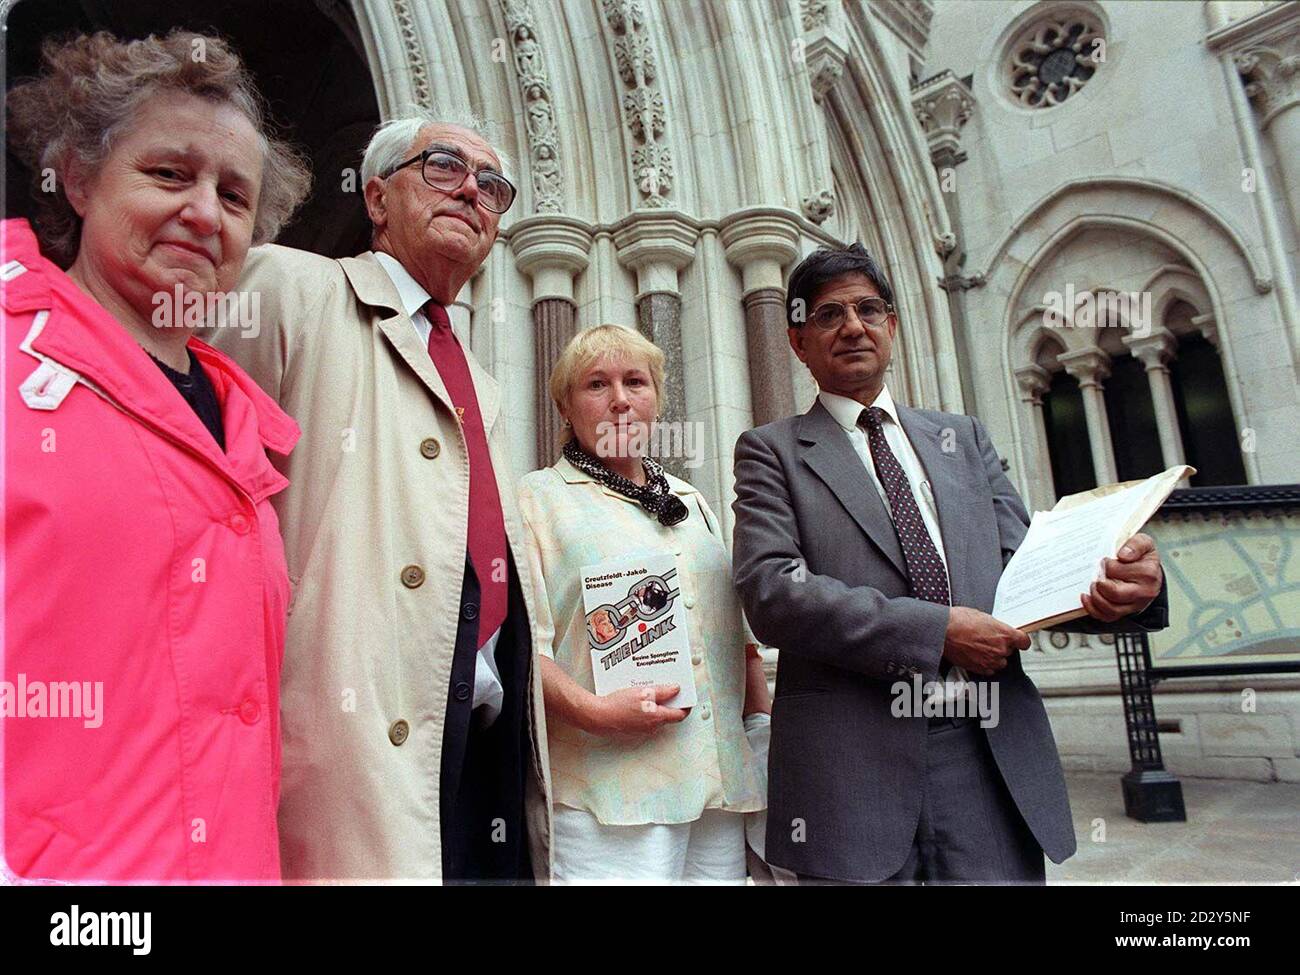 Scientist Dr Harash Narang (right), a specialist on Creutzfeldt-Jakob disease (CJD), outside the Royal Courts of Justice in London, today (Thursday) where he is launching an action alleging malicious falsehood against the Public Health Laboratory Service Board and two other named defendants. Pictured with Dr Narang are relatives of CJD victims (l/r) Margaret Ammon 63, from Surrey, John Williams, 68, from Carnavan and Wendy Bowden from Guildford. Photo by Ben Curtis. See PA Story COURTS Scientist. Stock Photo